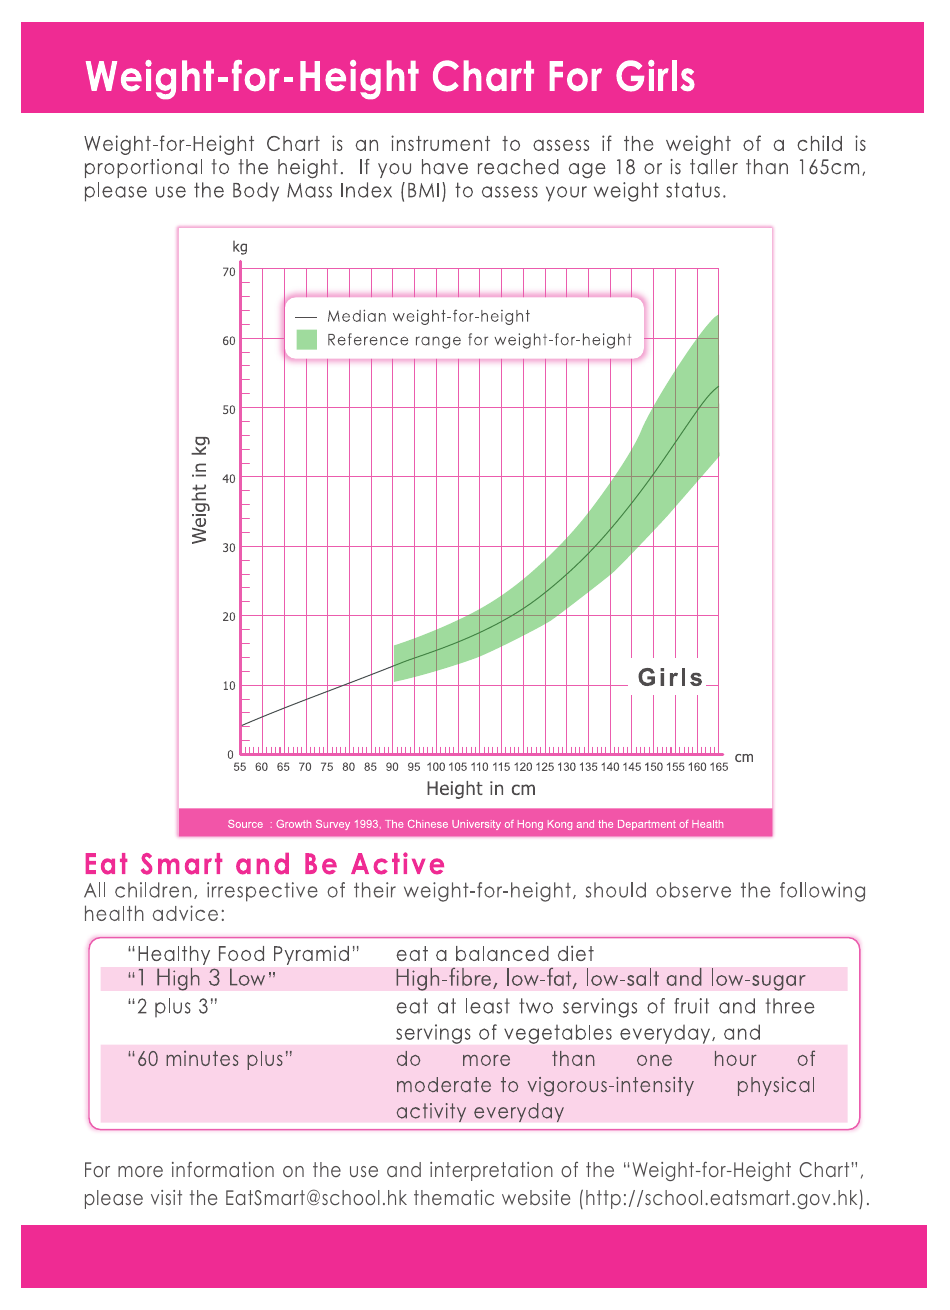 Weight-for-Height Chart for Girls - Doc Preview